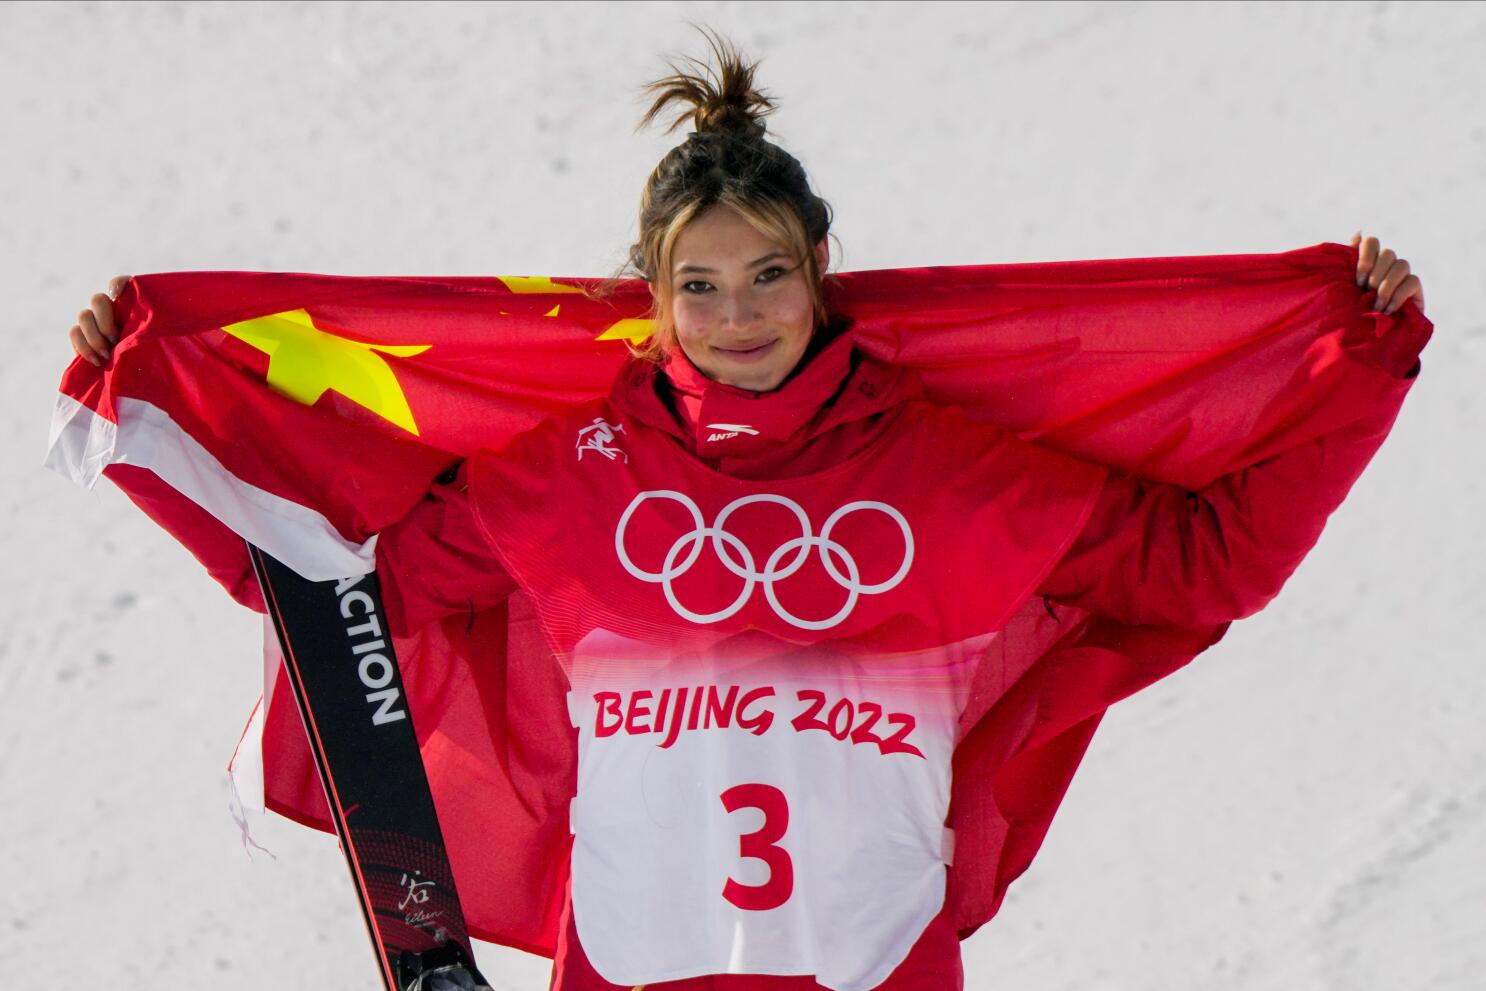 California-born Eileen Gu who won gold competing for China is